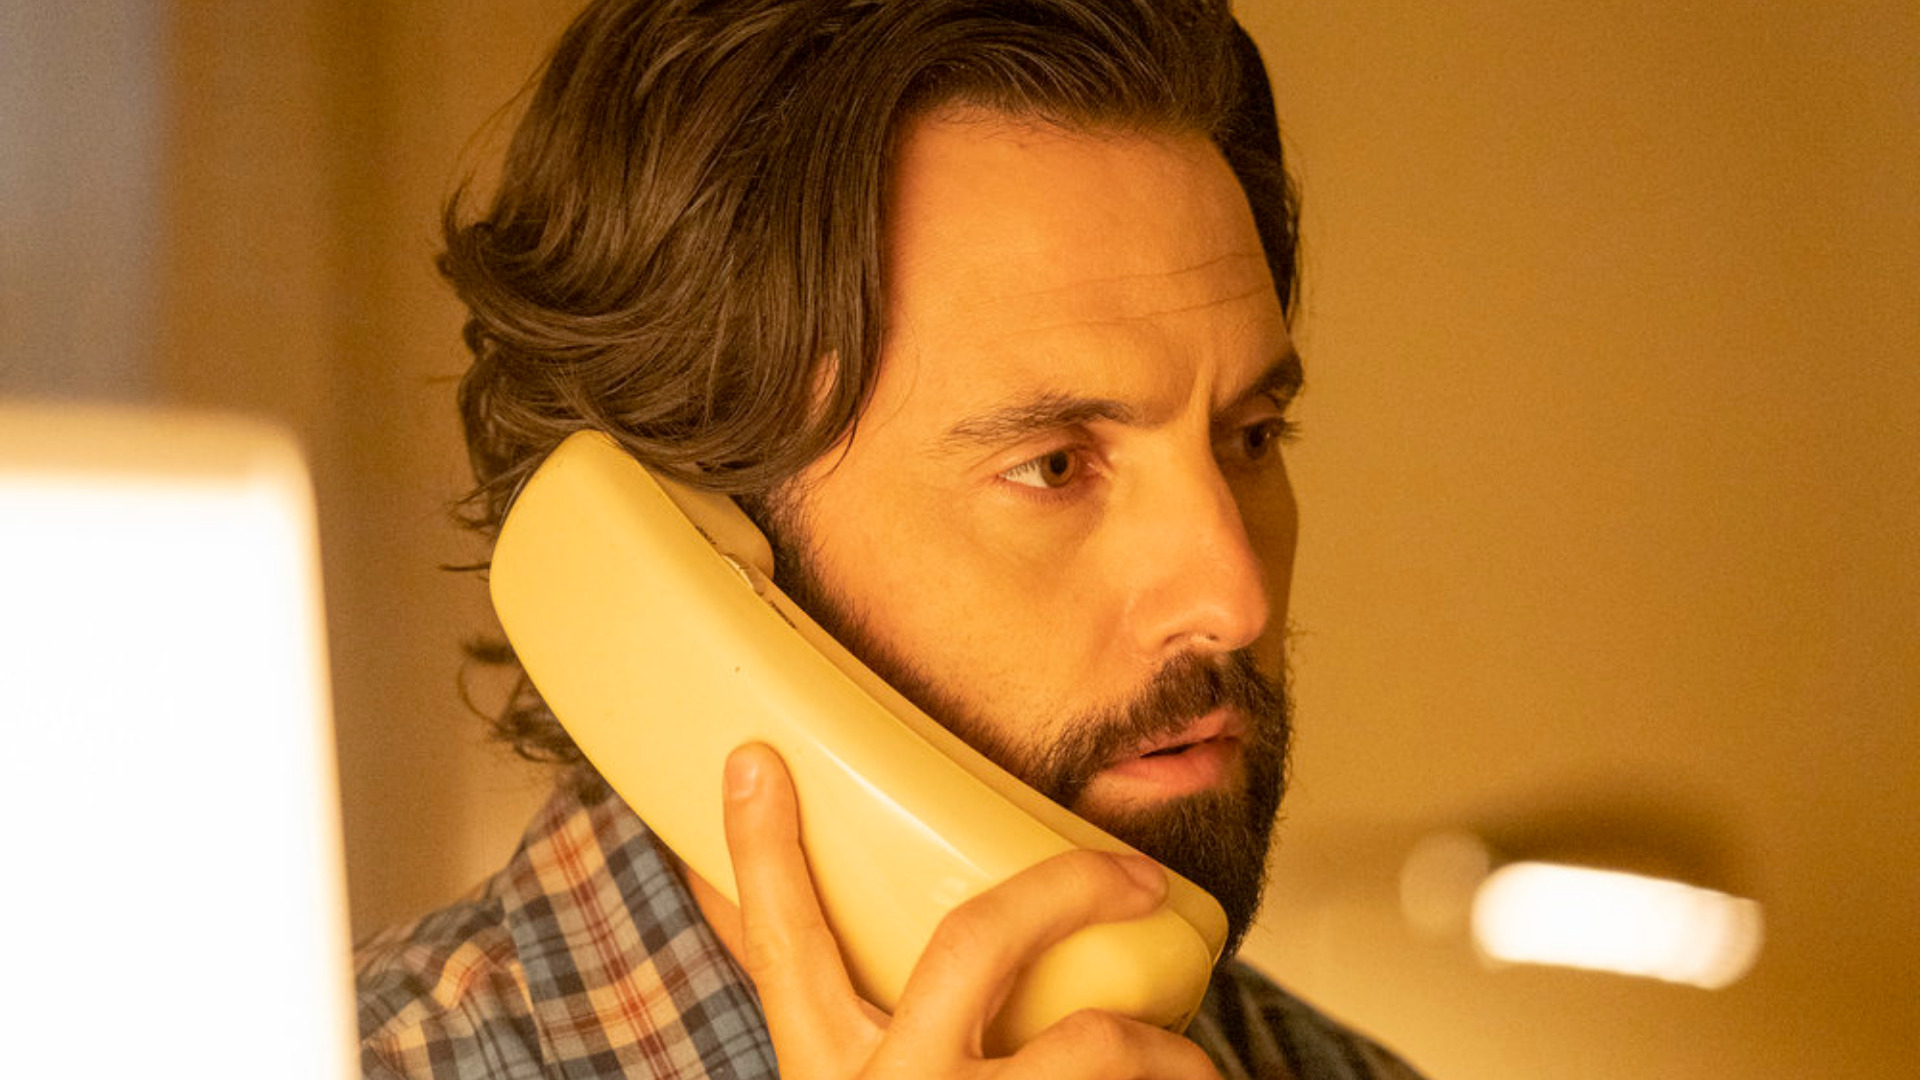 Milo Ventimiglia as Jack on the phone looking devastated in ‘This Is Us’ Season 6 Episode 3